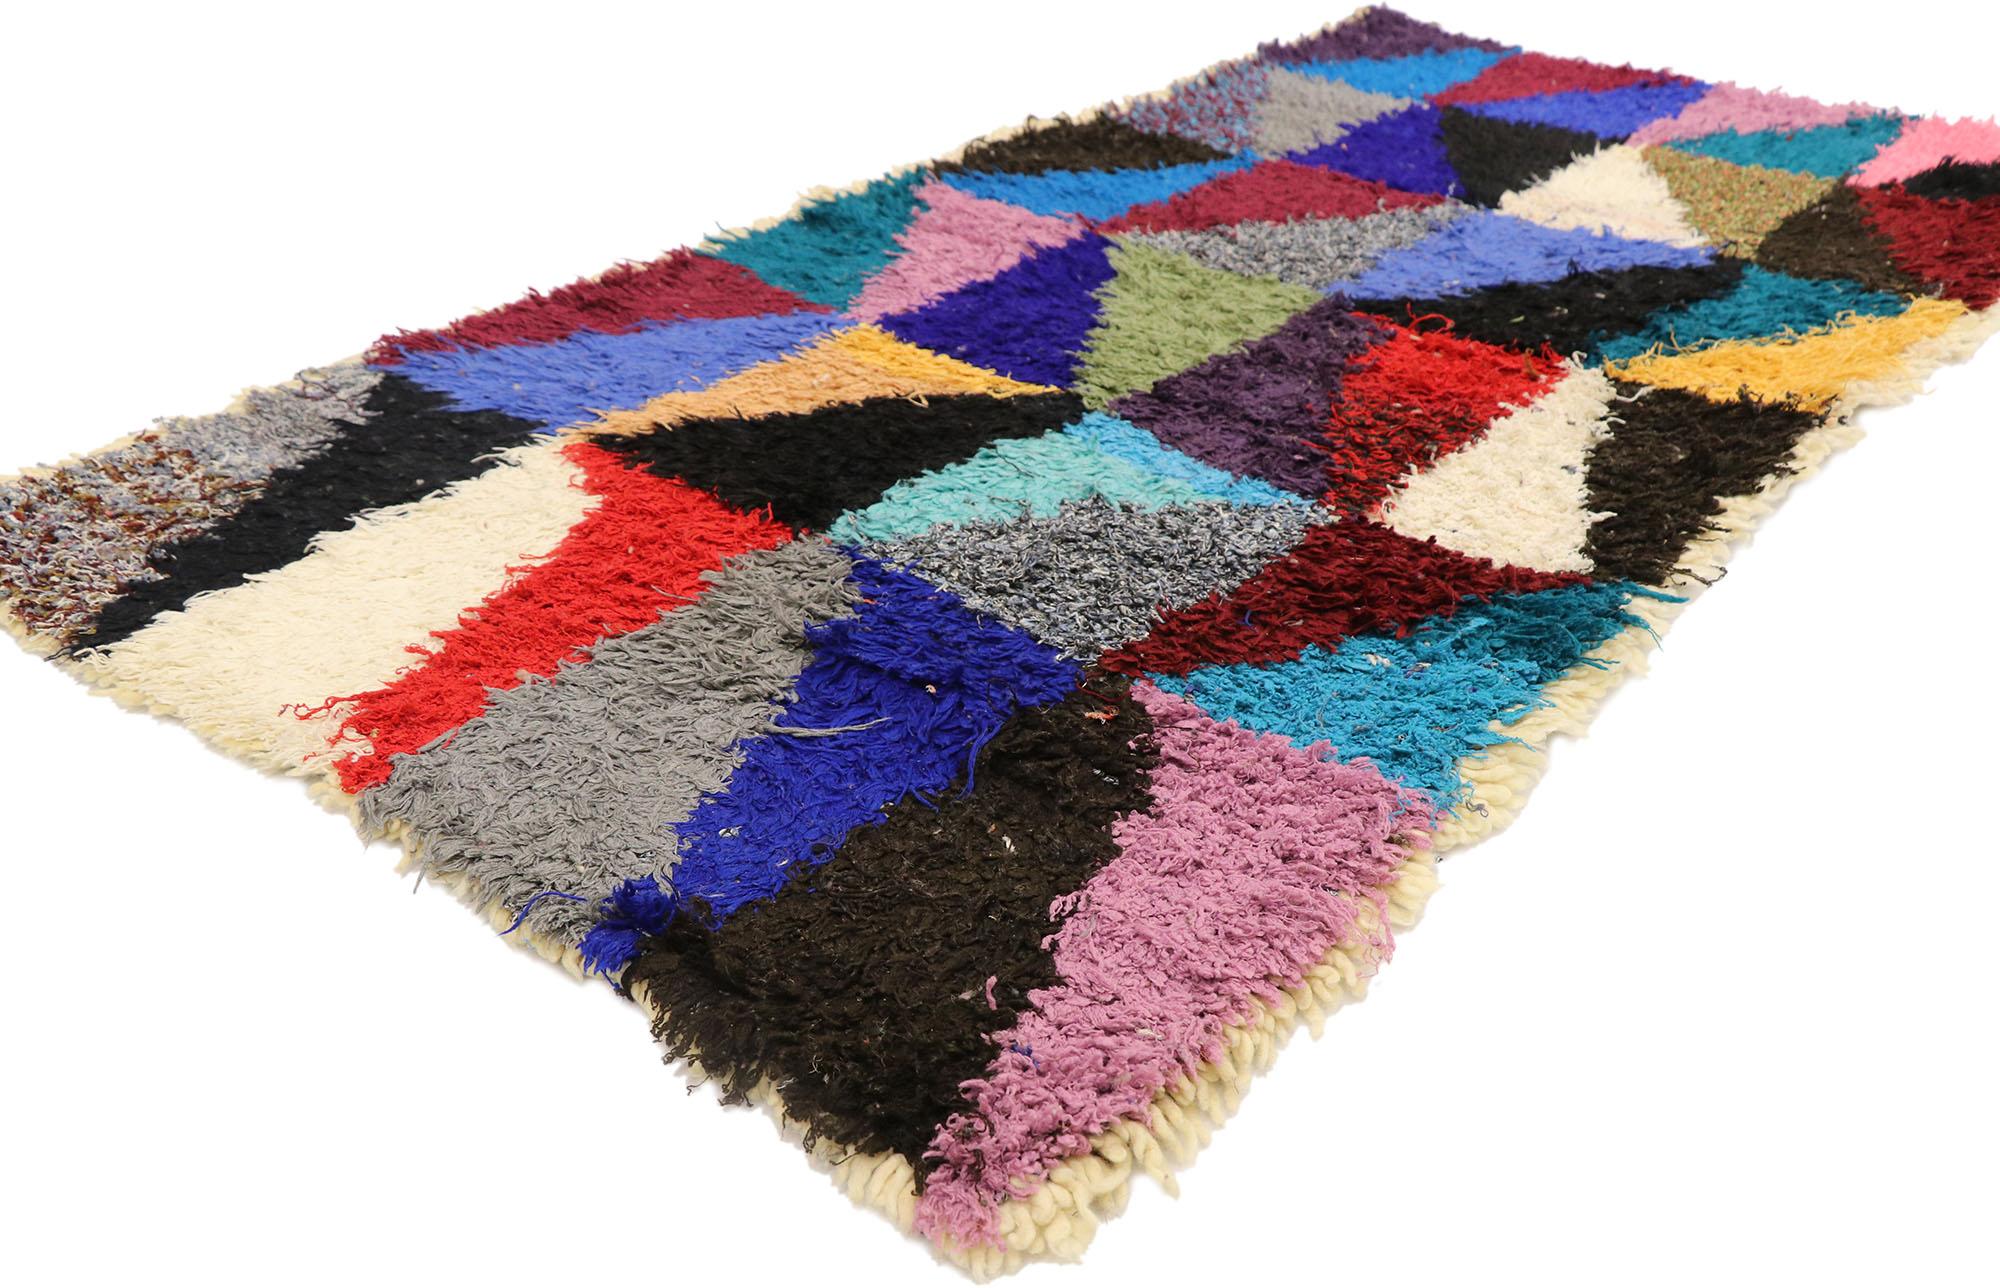 21578 Vintage Berber Moroccan Boucherouite rug with Bauhaus Style 03'00 X 06'03. Showcasing a bold expressive geometric design, incredible detail and texture, this hand knotted cotton and wool vintage Berber Boucherouite Moroccan rug is a